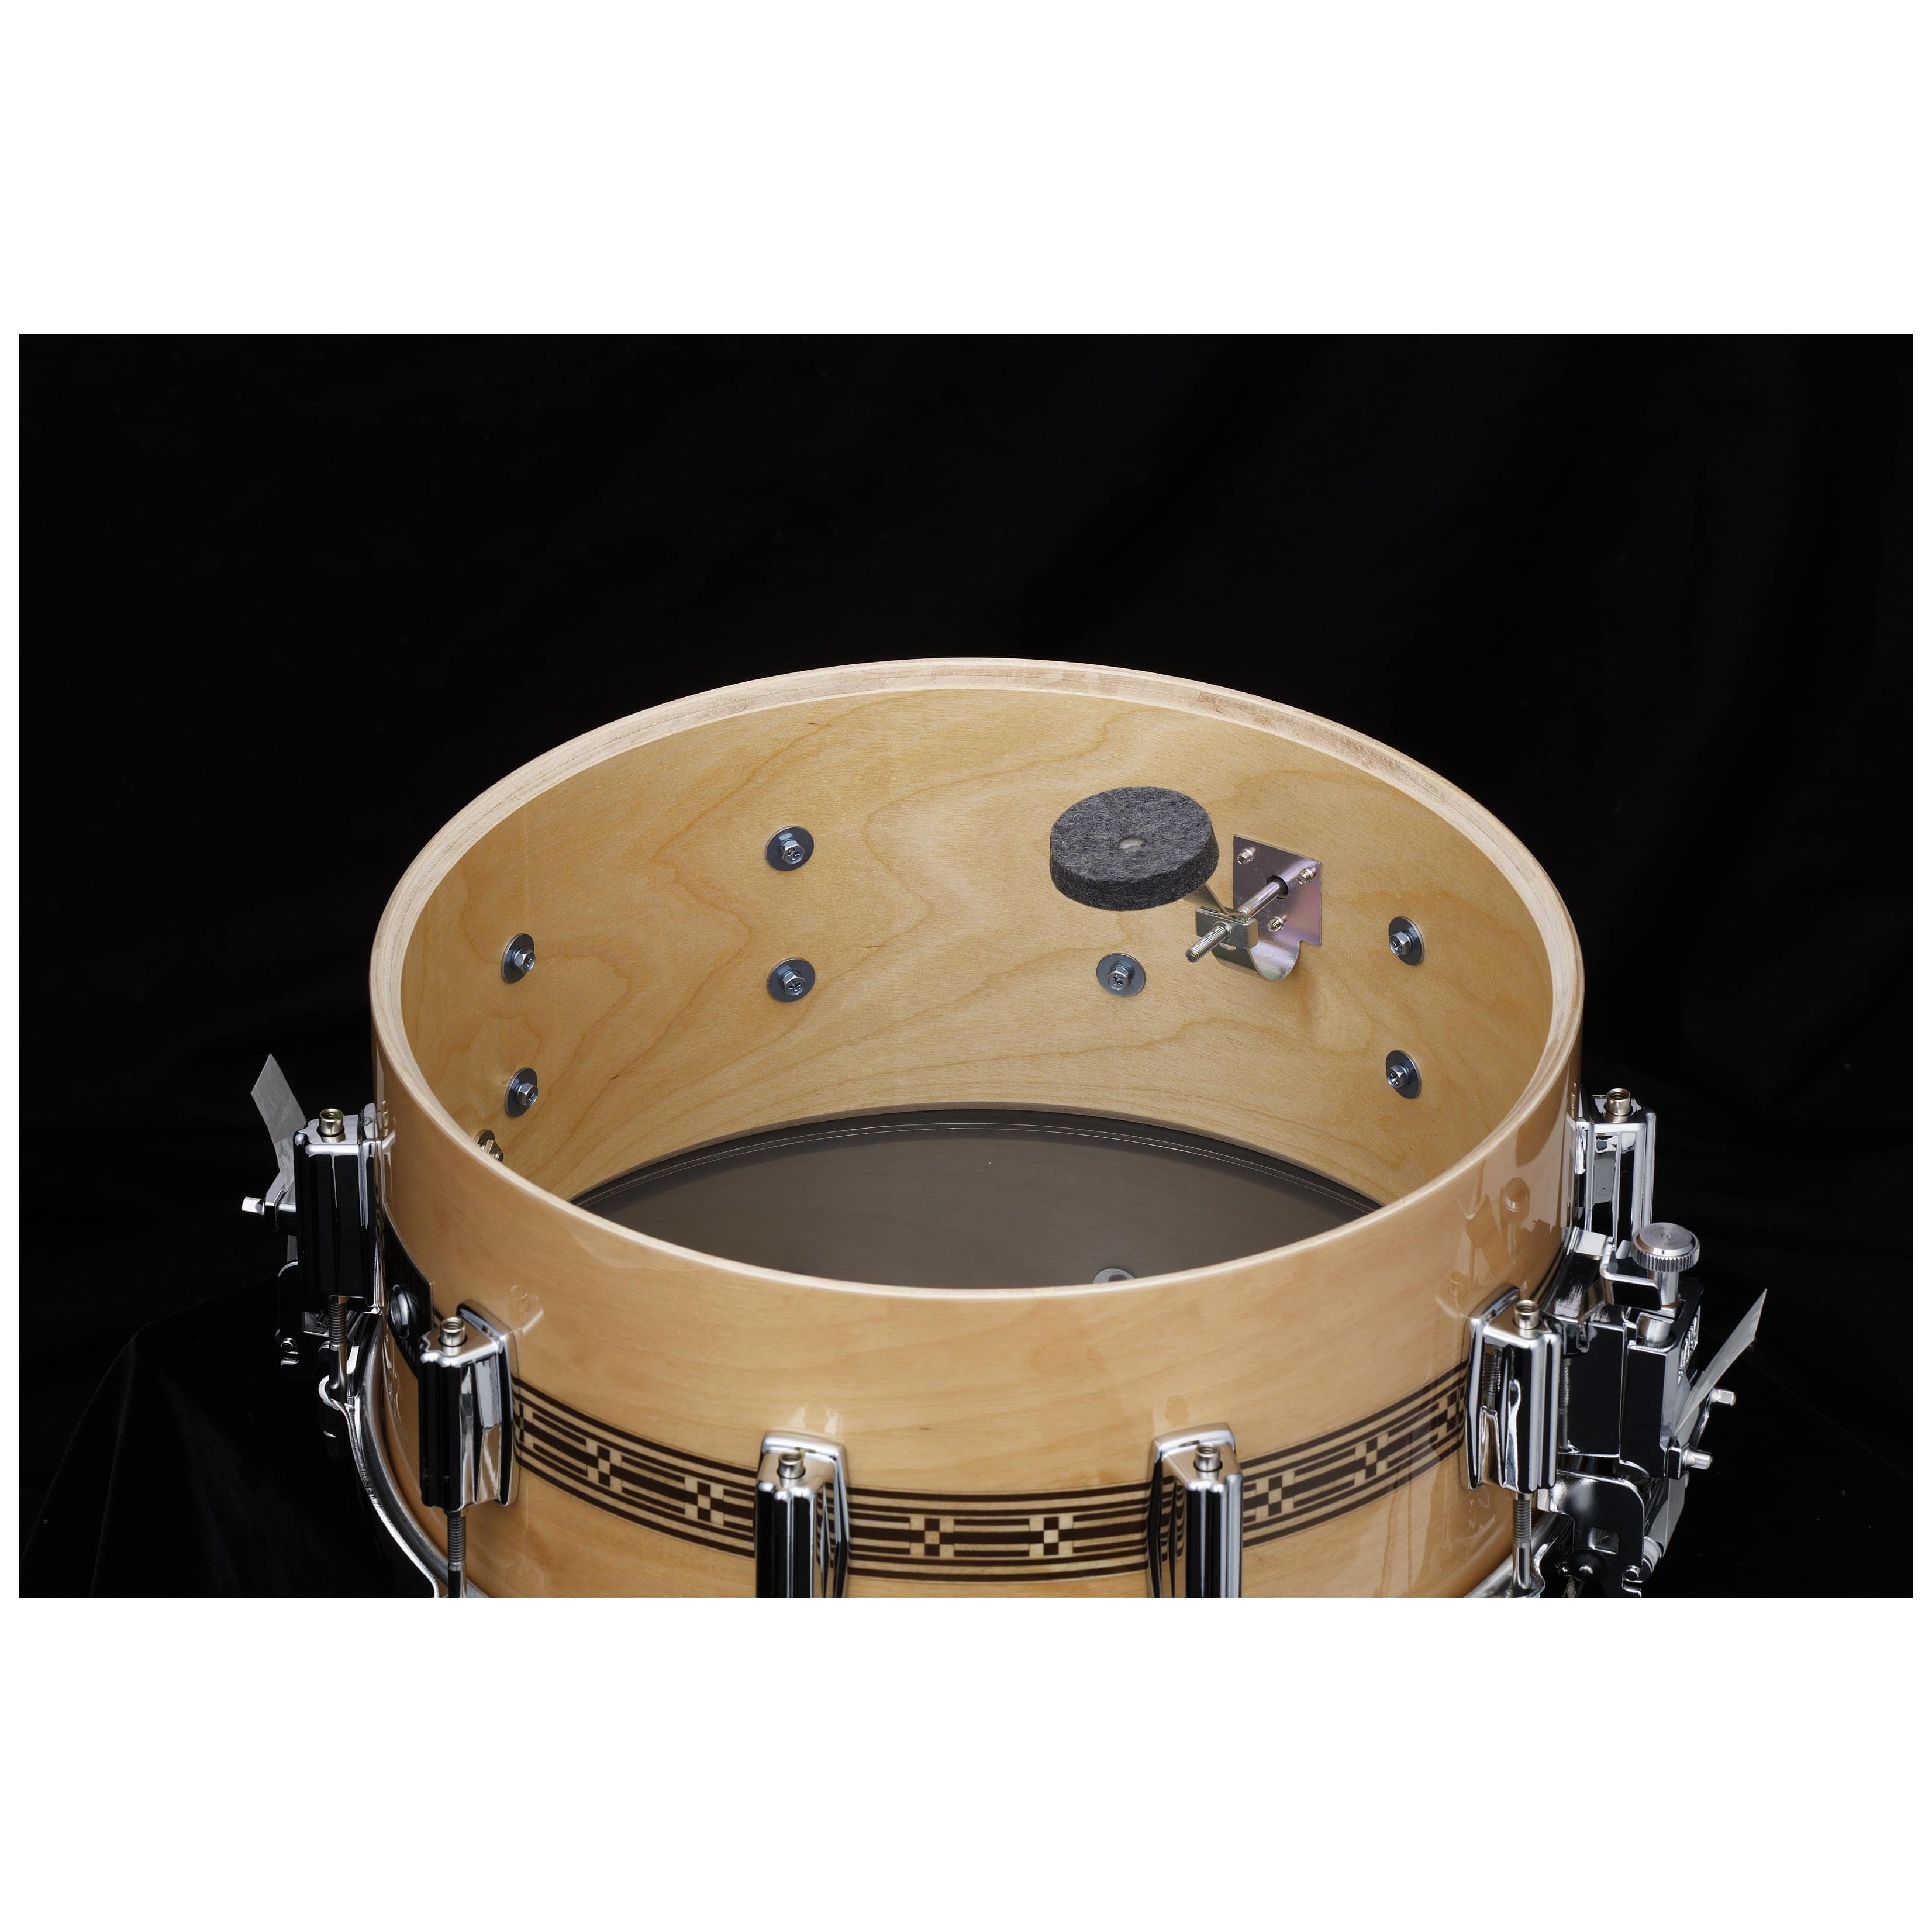 Tama AW-456 - 50th LIMITED Mastercraft Artwood Snare  Drum 14"x5" 5